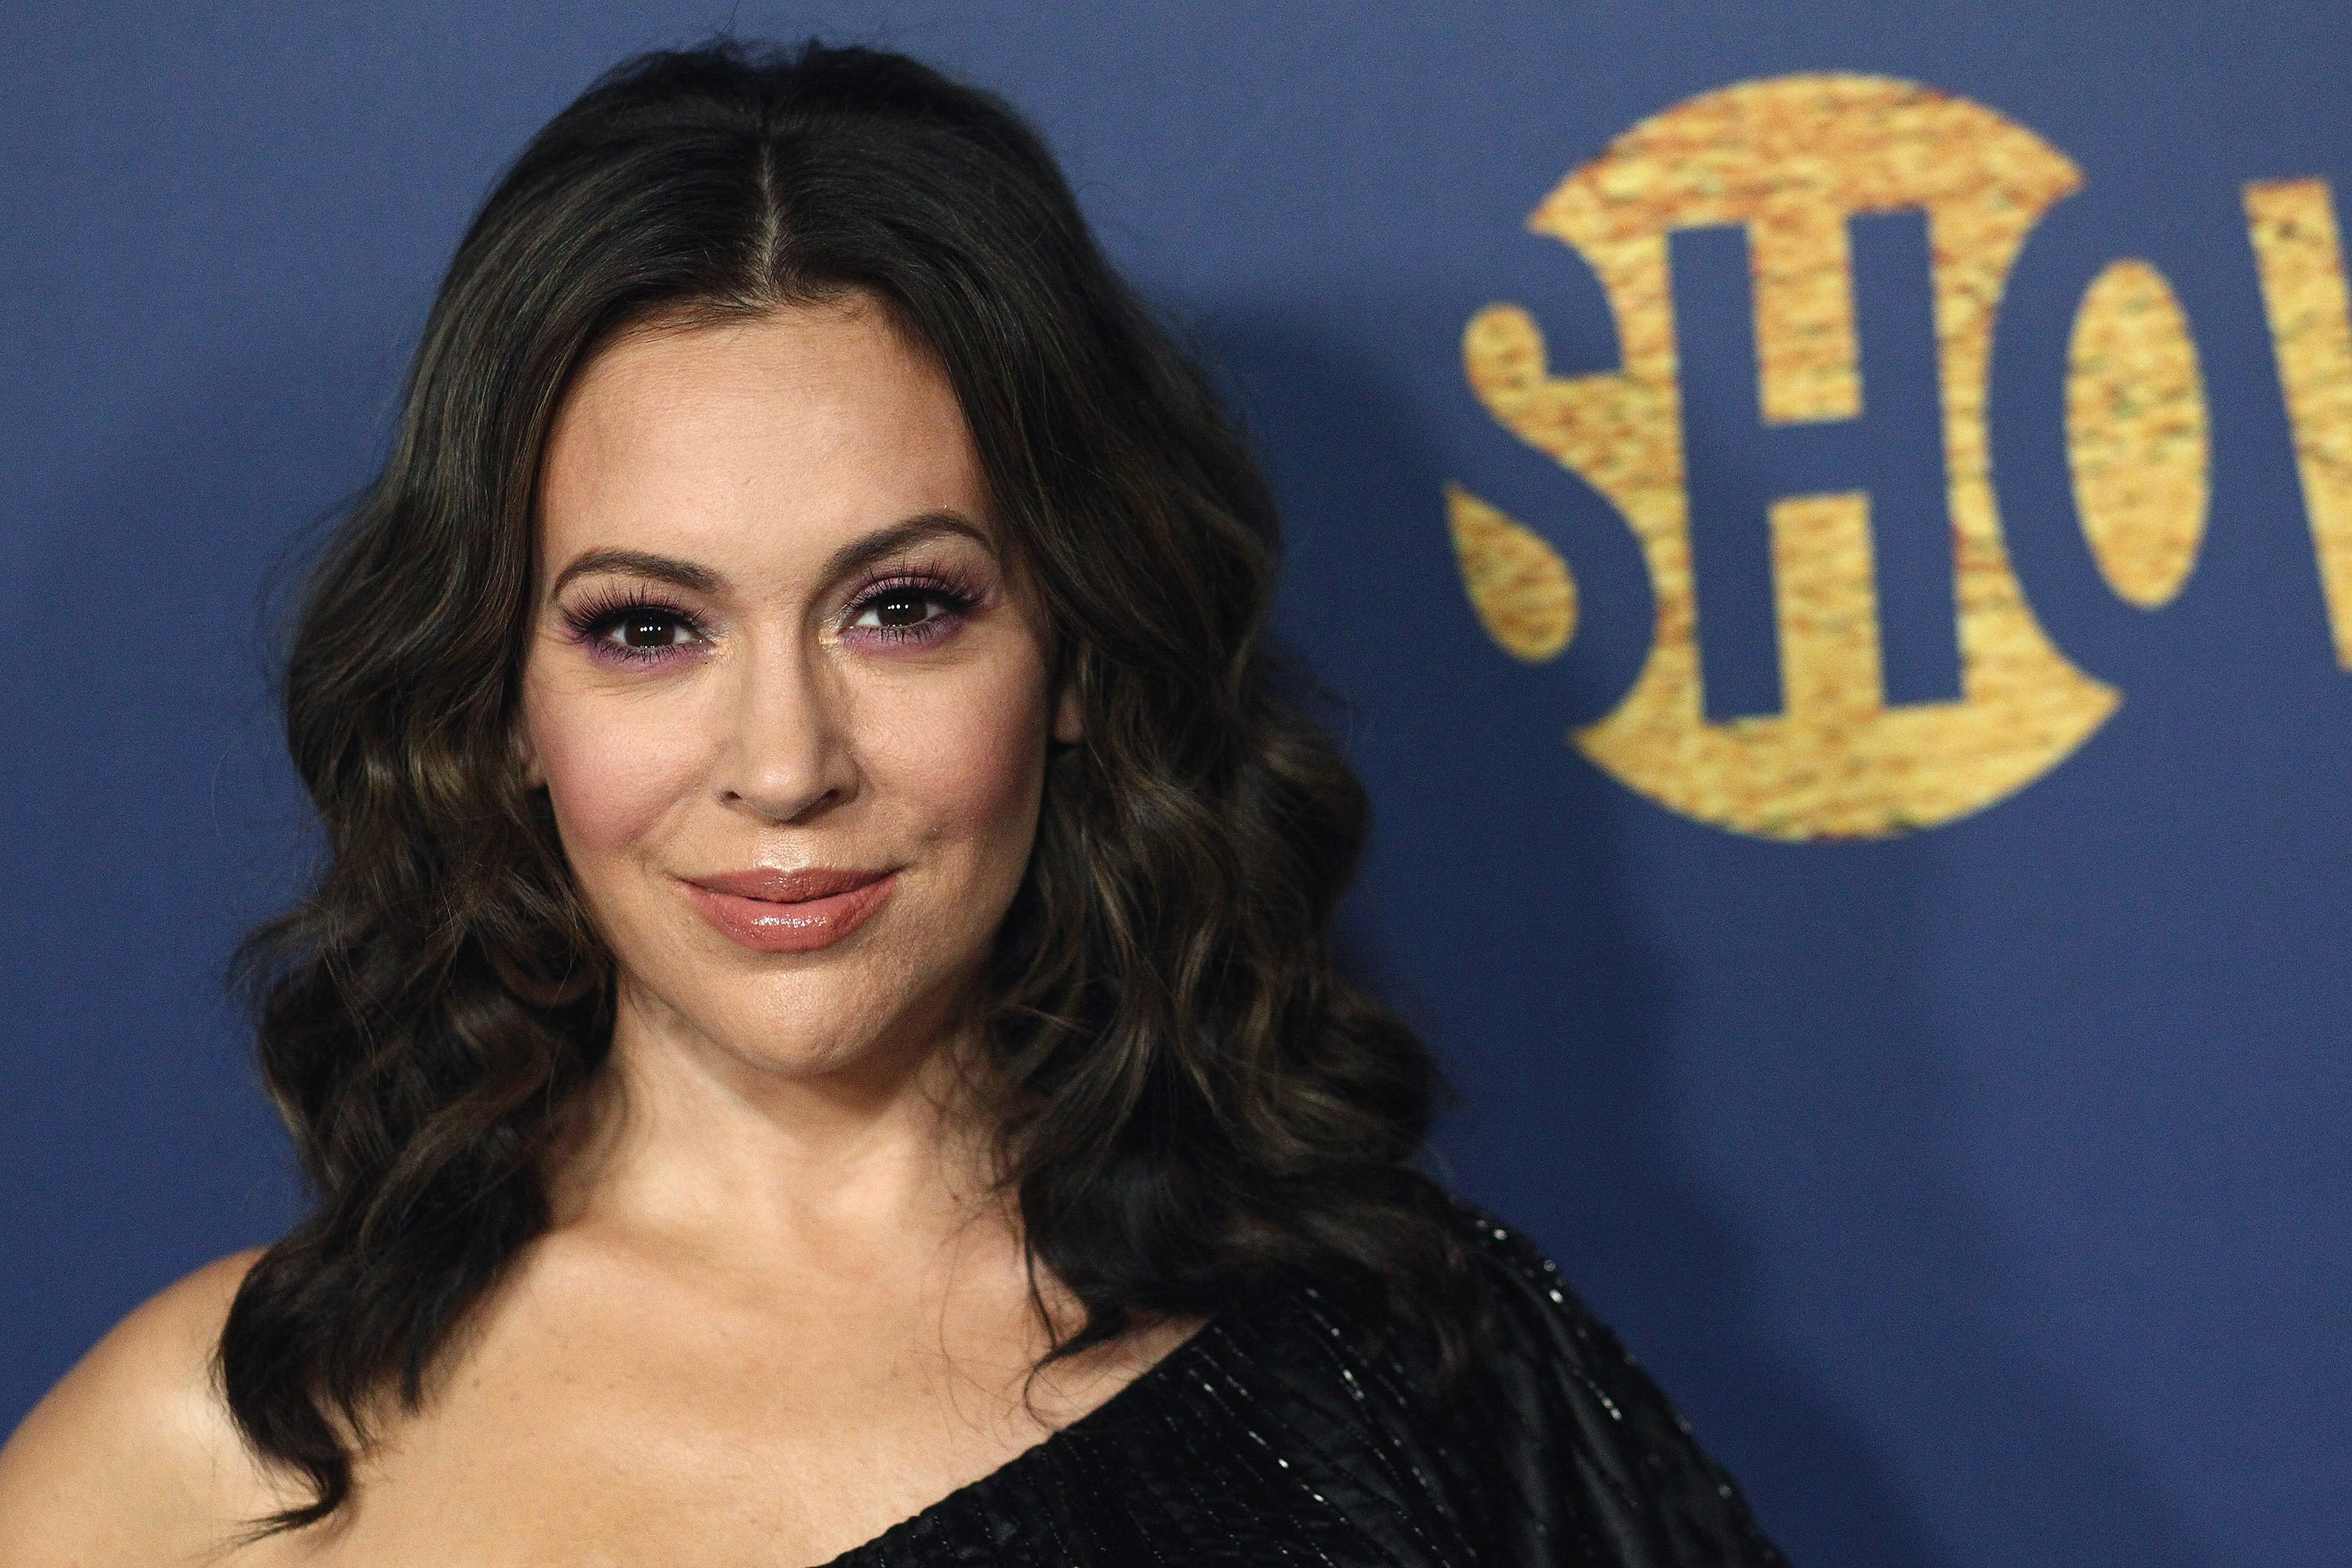 Alyssa Milano attends the Showtime Emmy Eve Nominees Celebration at Chateau Marmont on September 16, 2018 | Photo: GettyImages